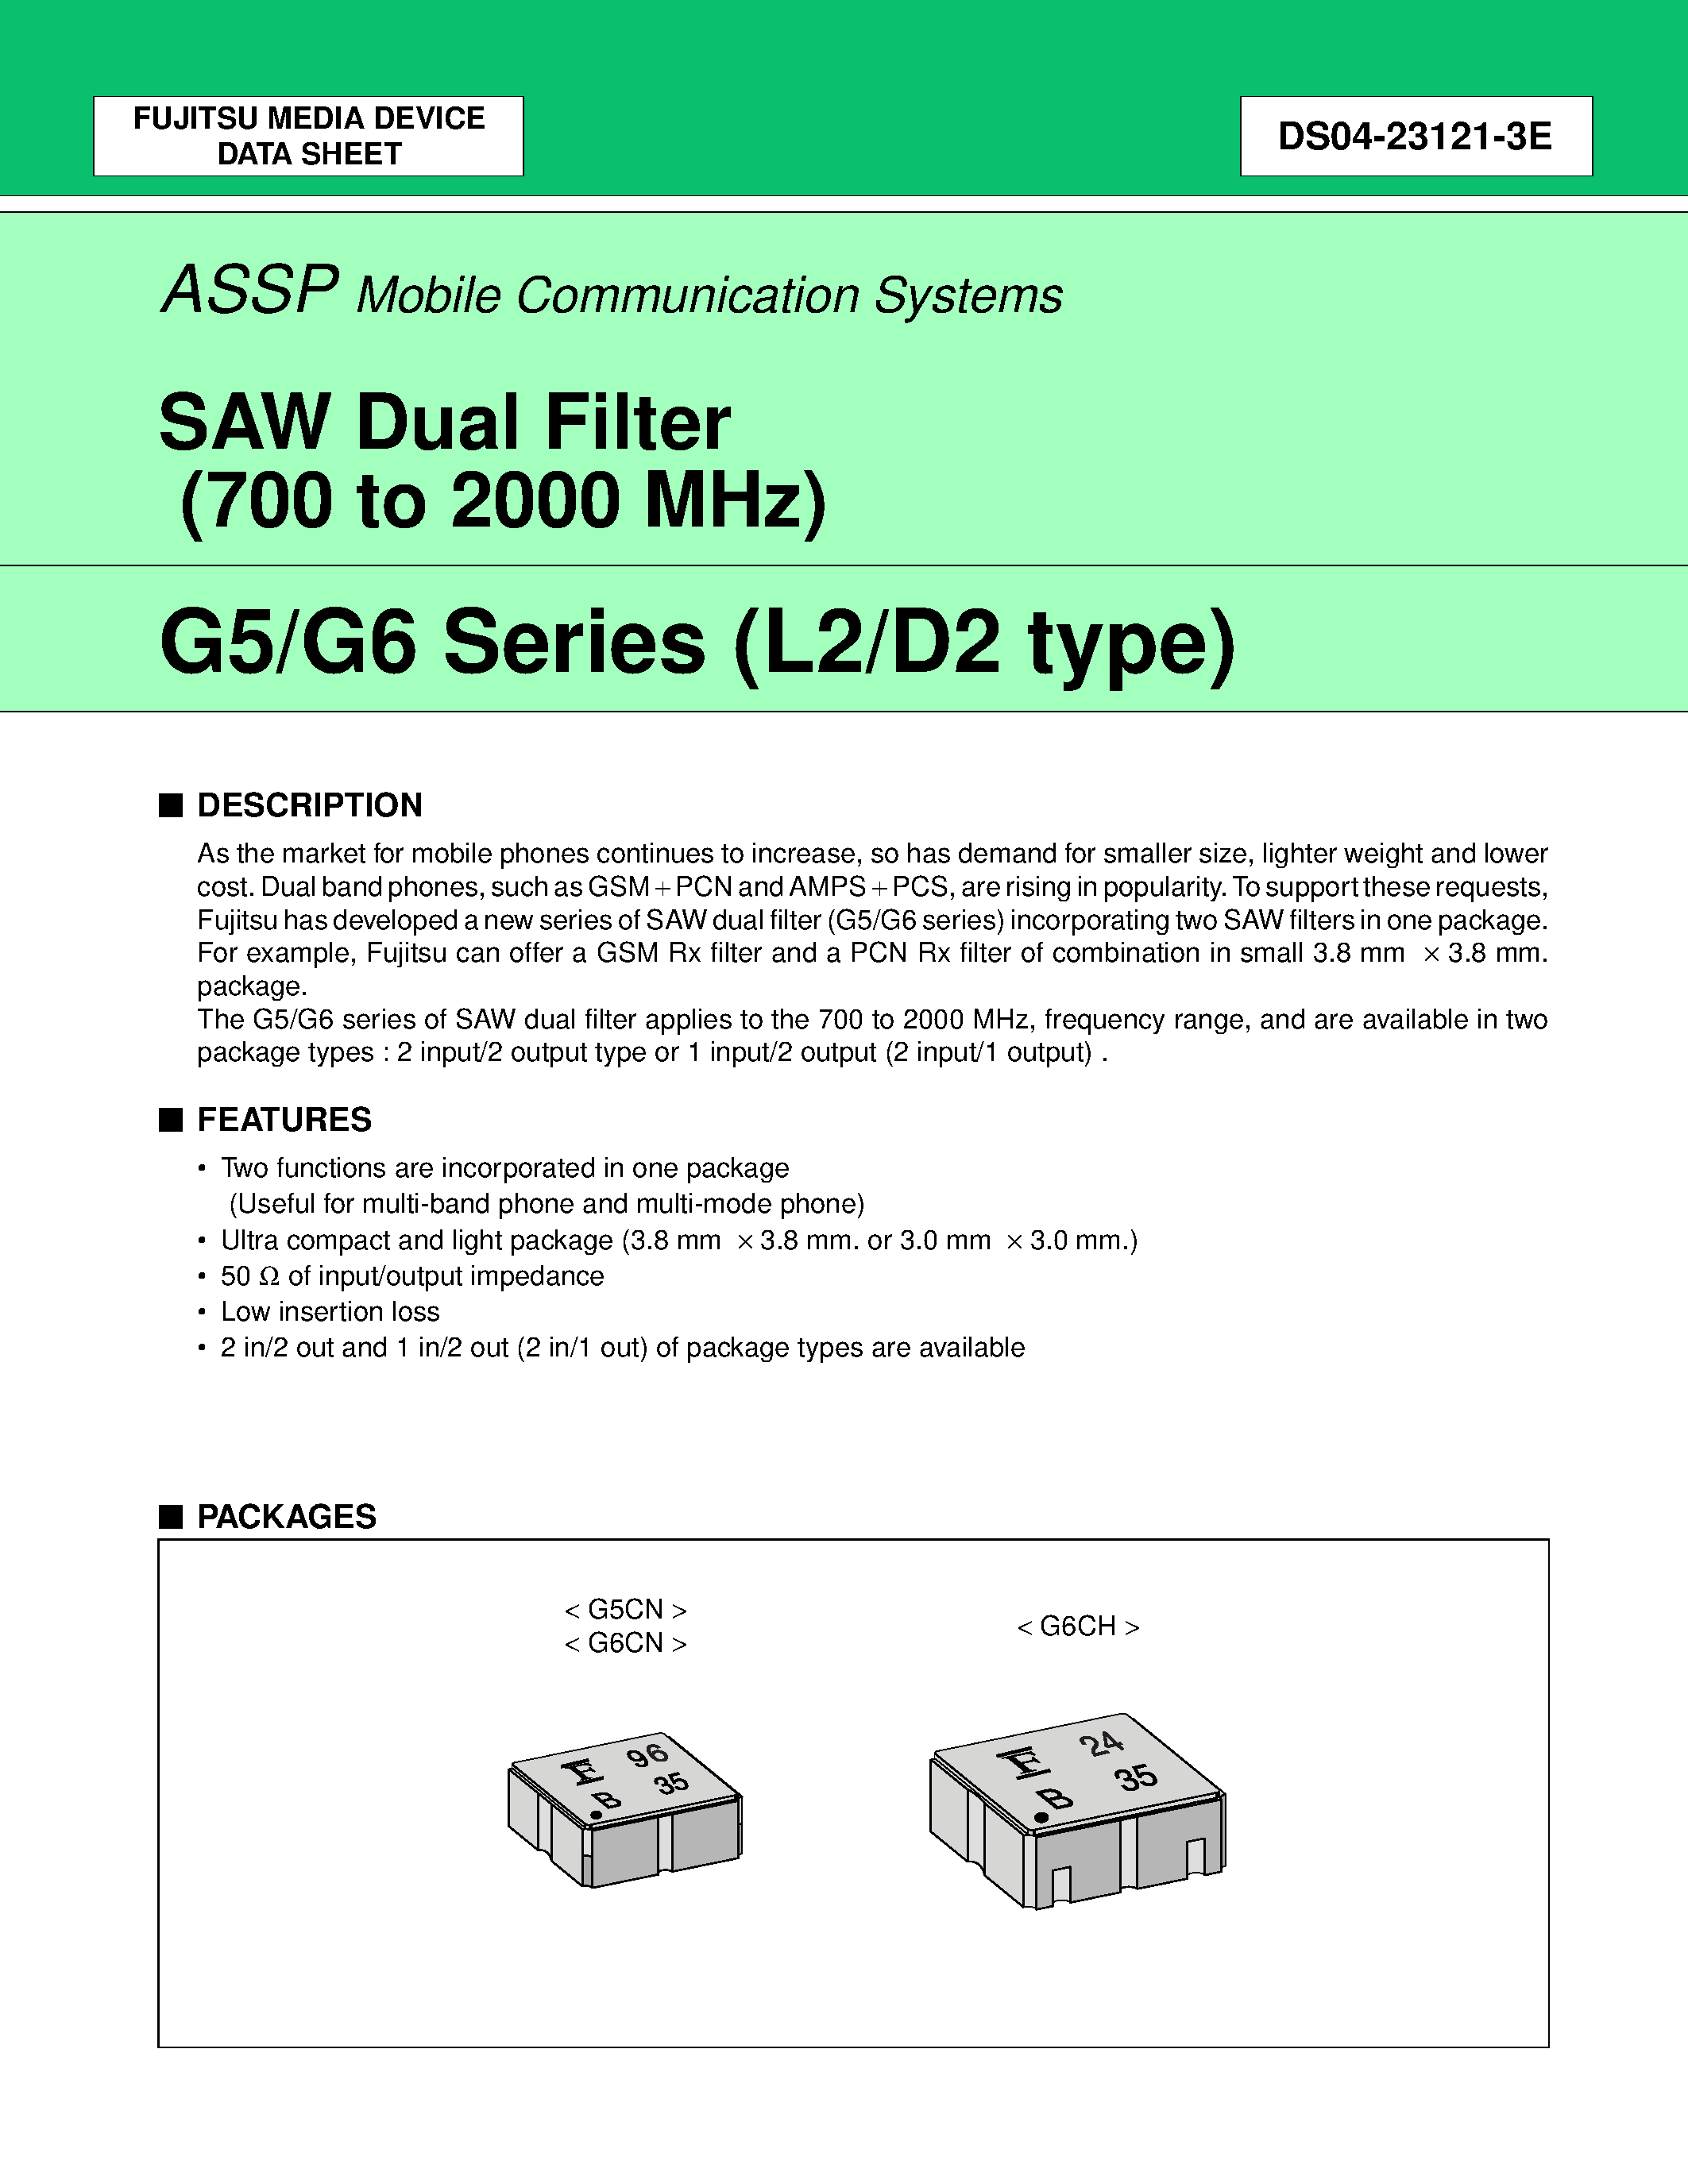 Datasheet FAR-G5CN-877M50-D292-V - SAW Dual Filter (700 to 2000 MHz) page 1